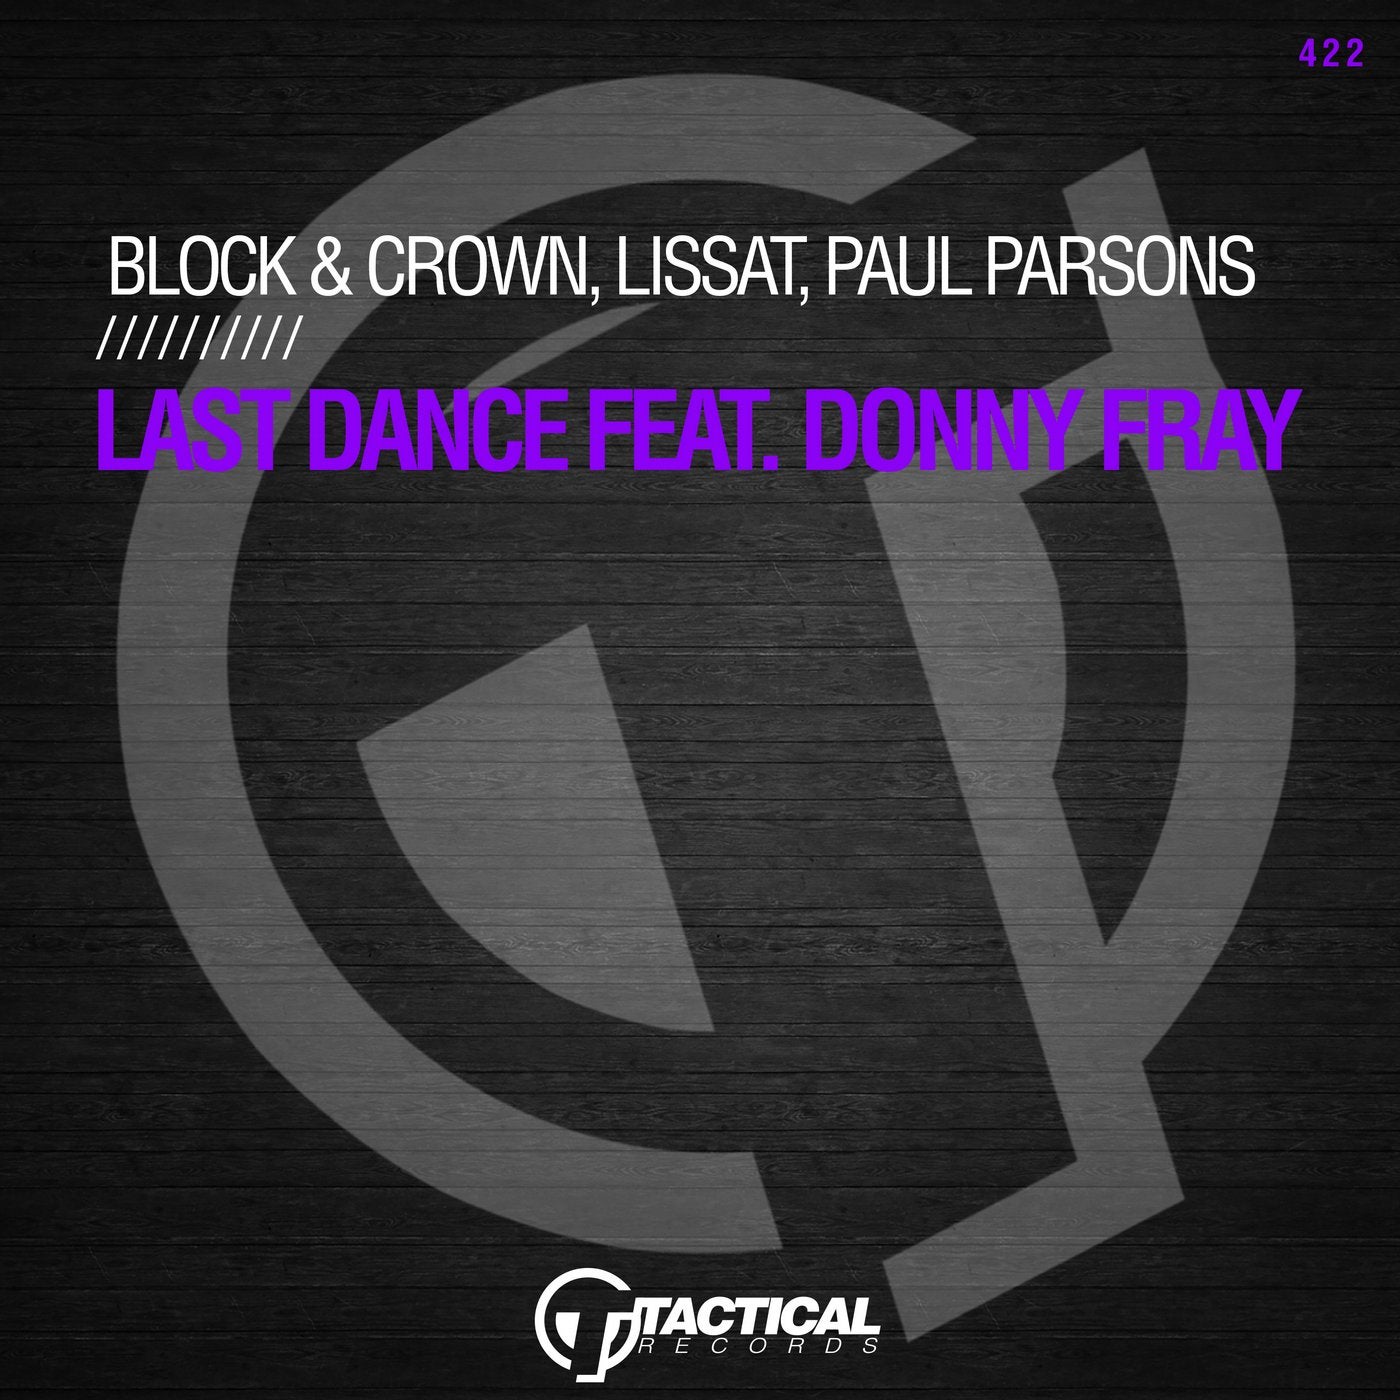 Last Dance Feat. Donny Fray